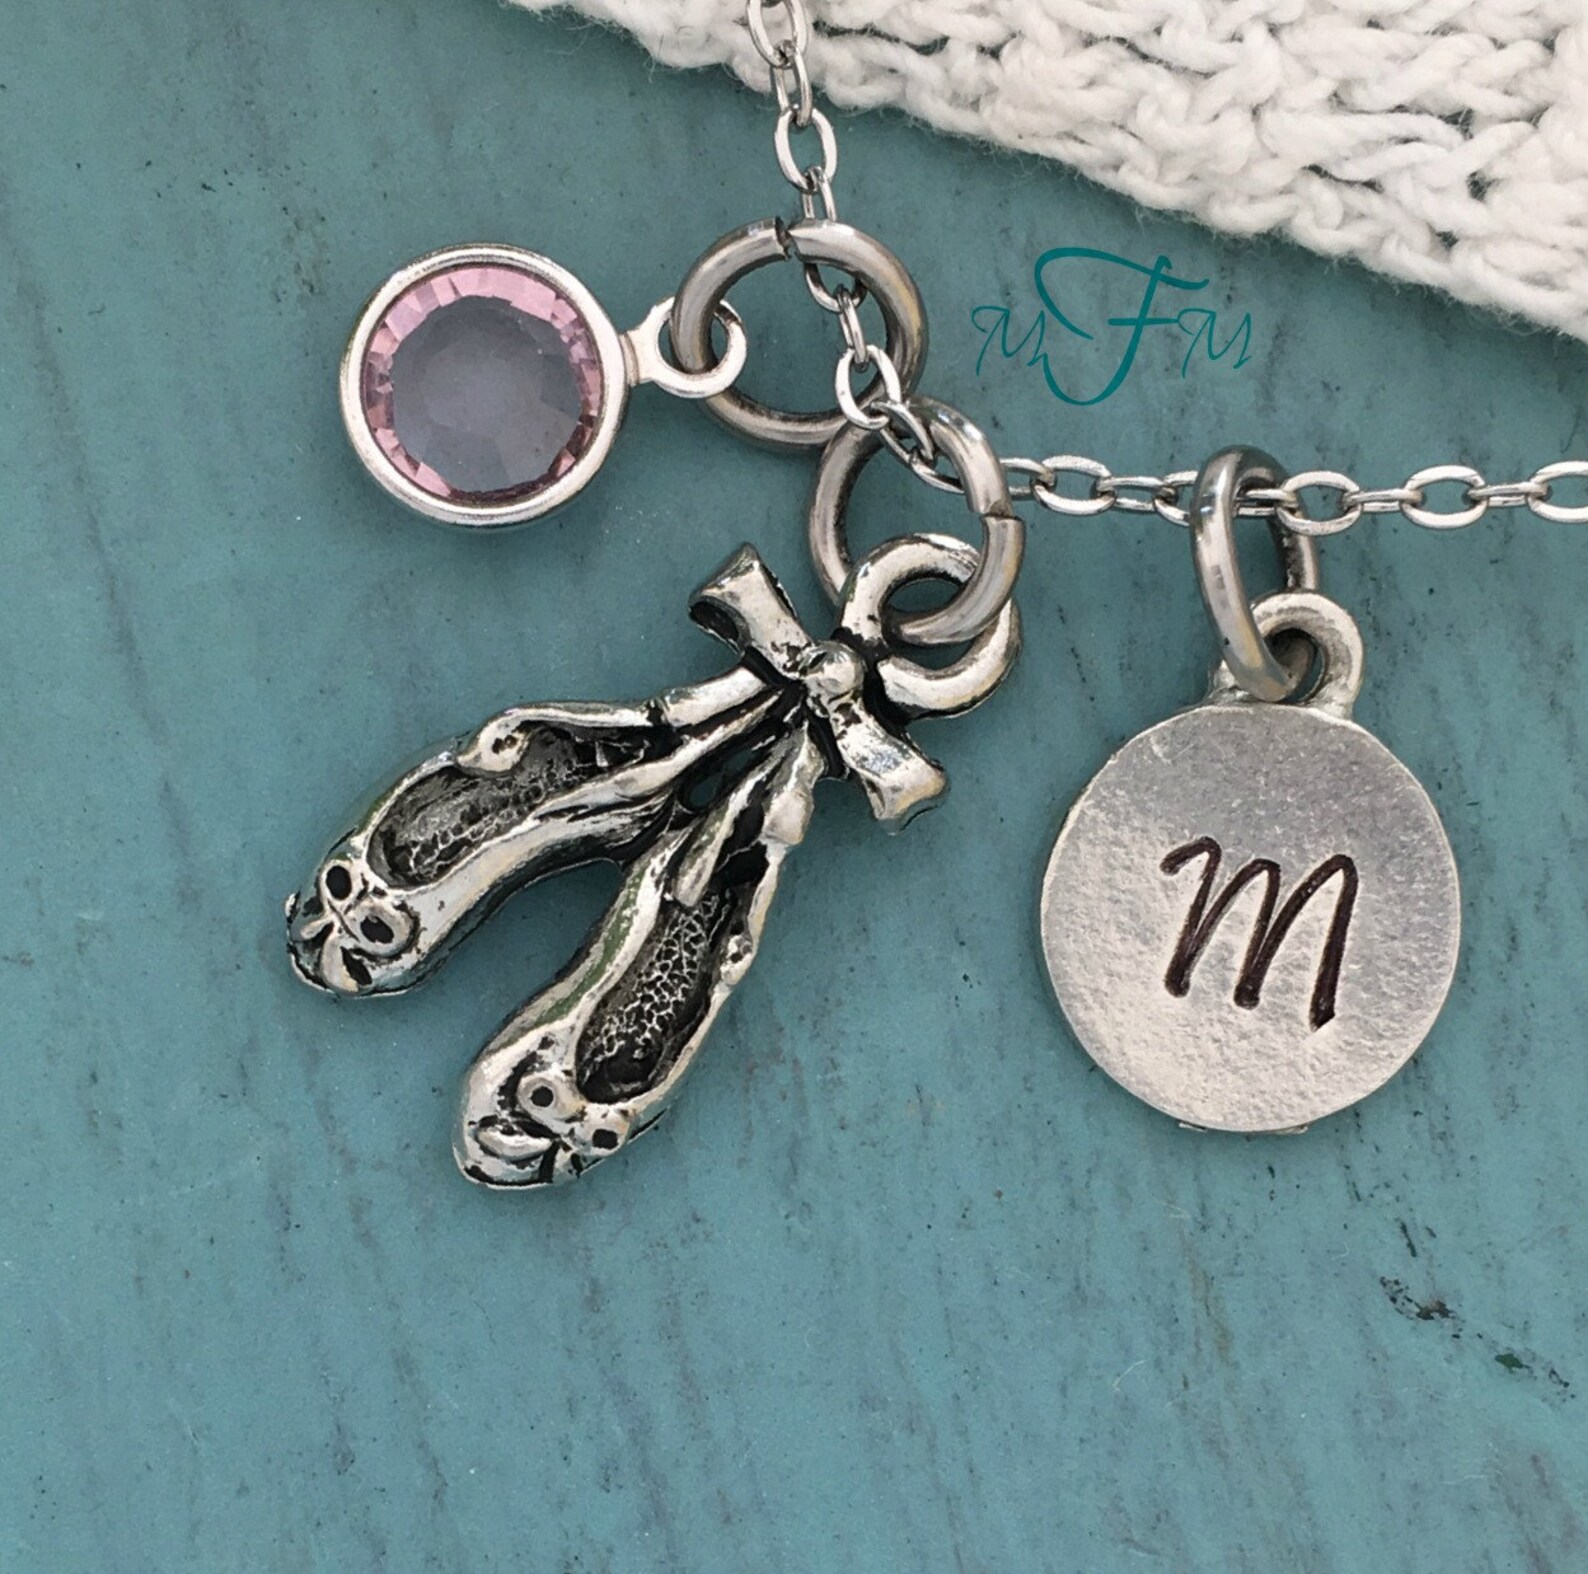 ballet shoes charm necklace, personalized necklace, silver pewter ballet shoes charm, custom necklace, swarovski crystal birthst